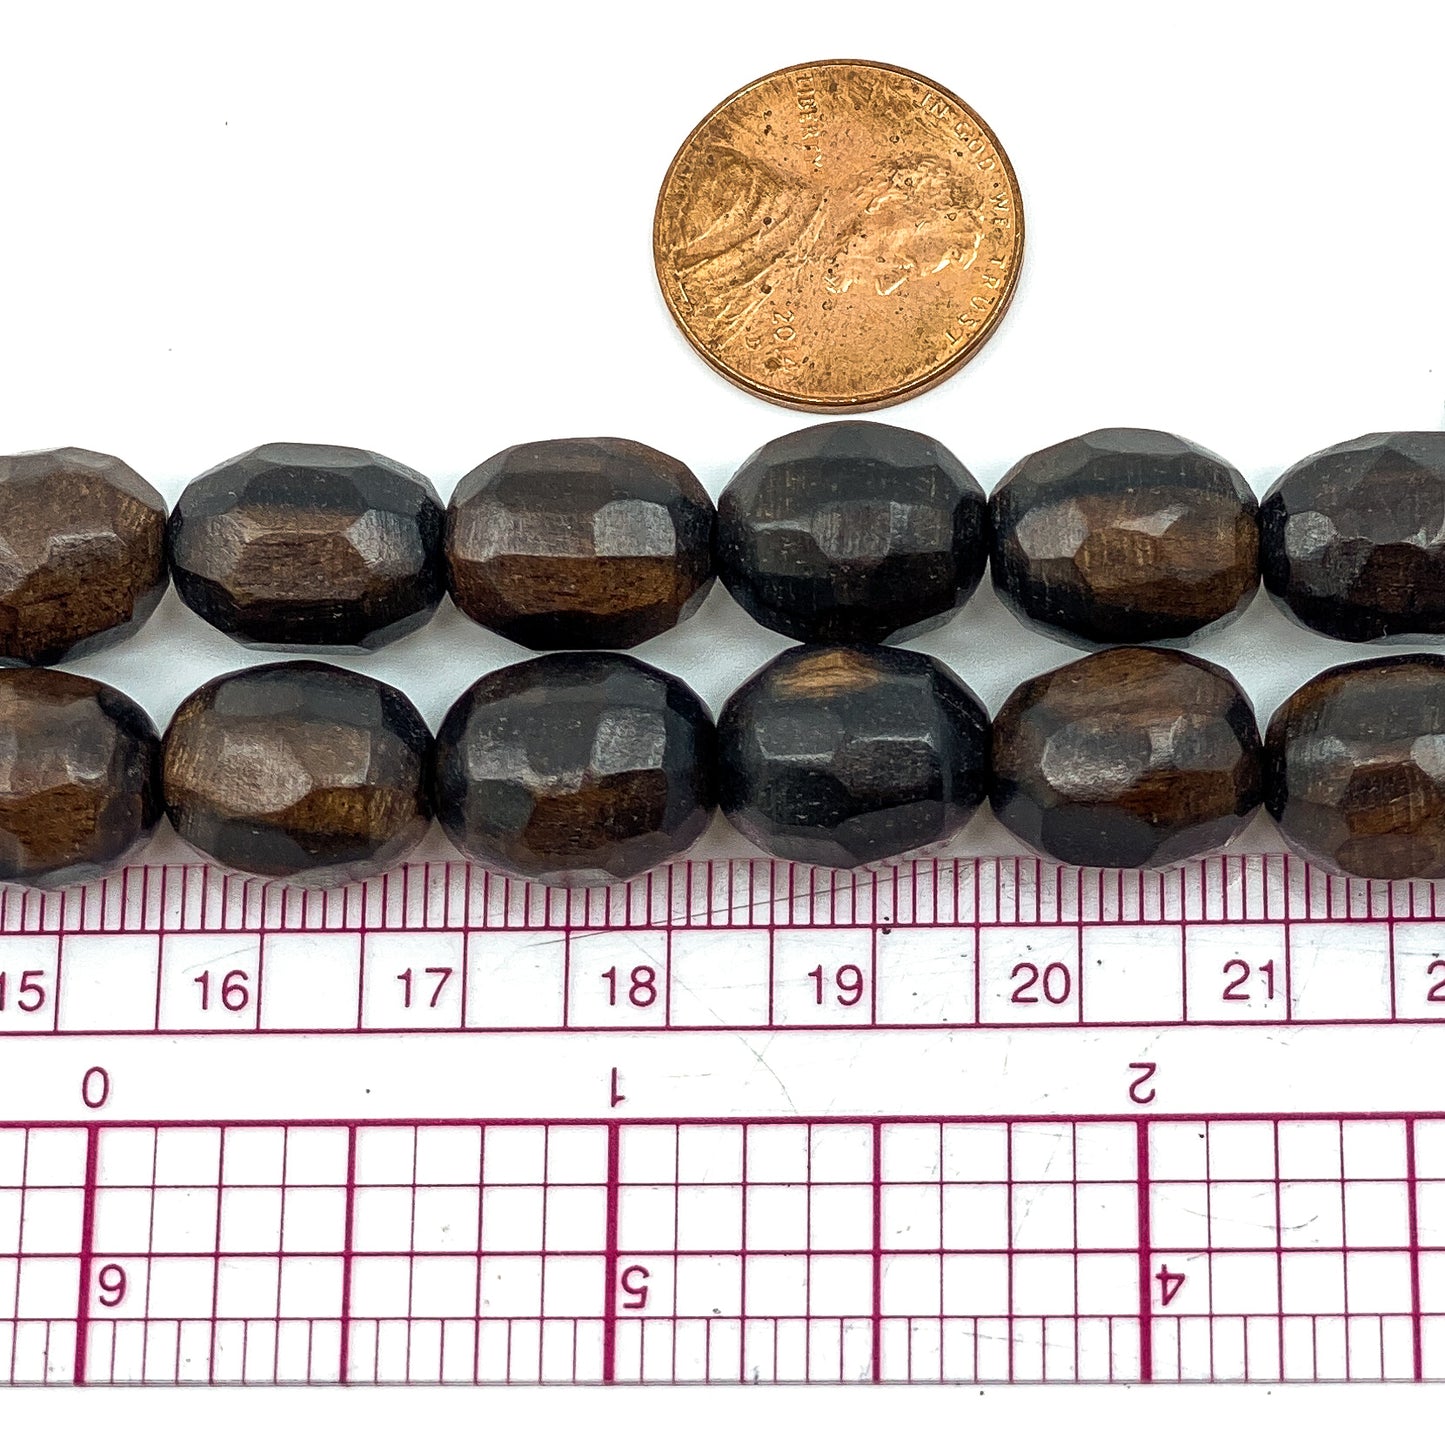 Faceted Tiger Ebony Wood Strand - 10x14mm Oval